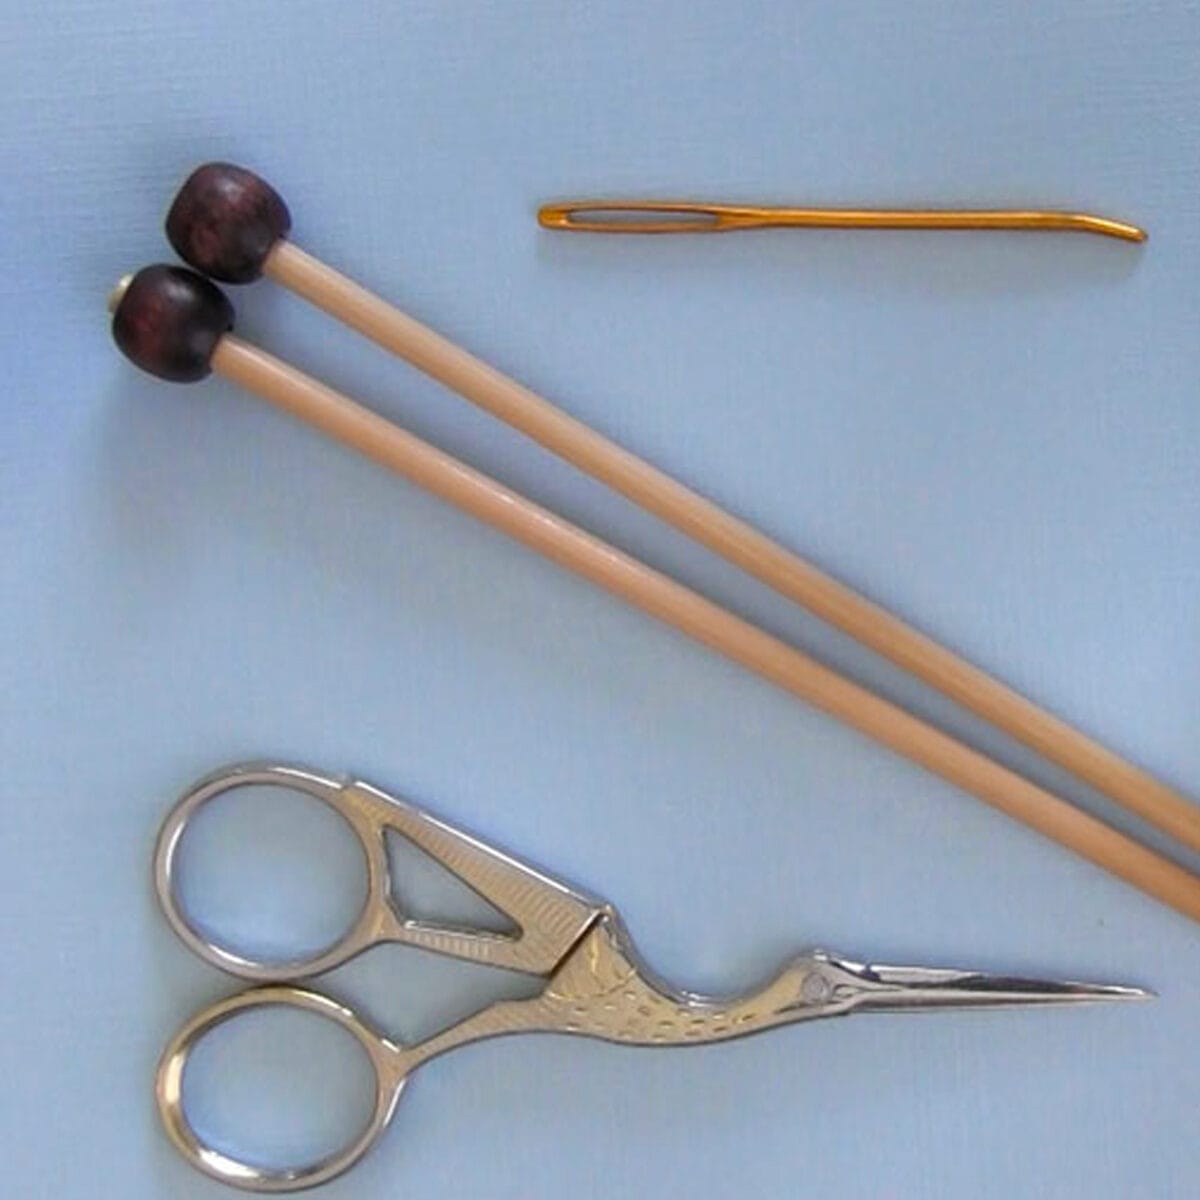 Two straight wooden bamboo knitting needles, a pair of stork shaped scissors, and a tapestry needle atop a blue background.